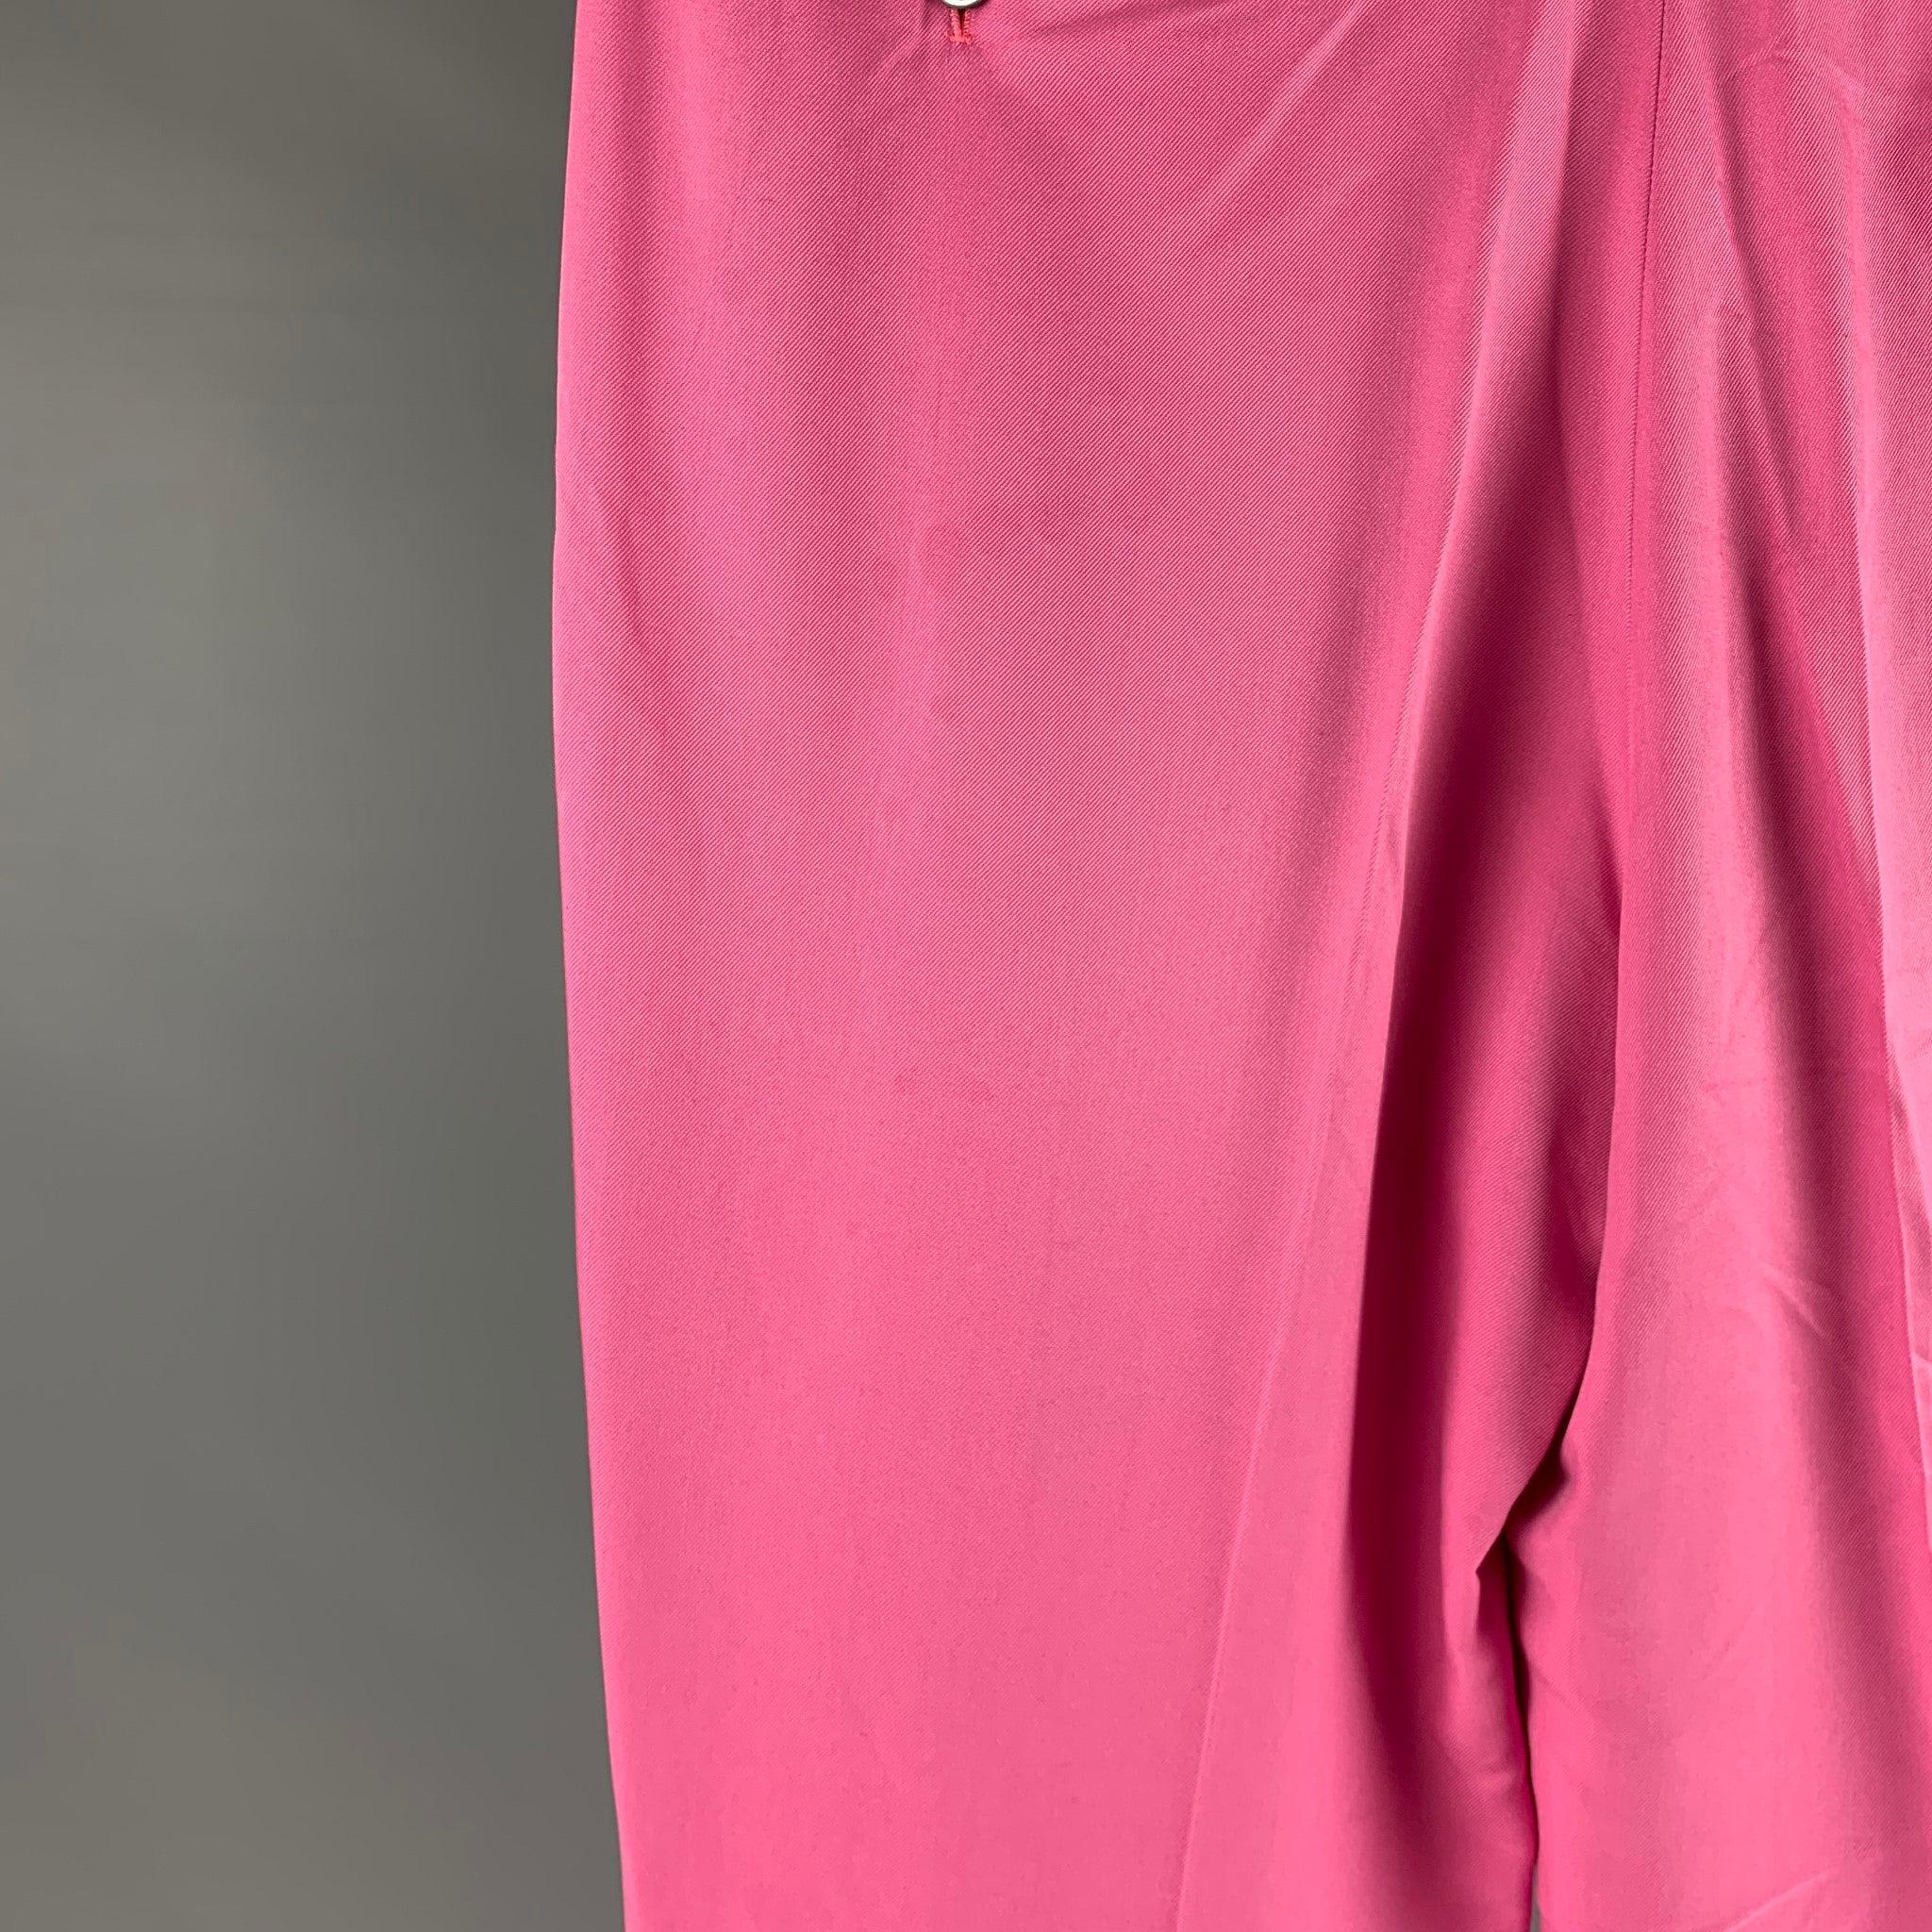 RALPH LAUREN Size 36 Pink Silk Pleated Dress Pants In Good Condition For Sale In San Francisco, CA